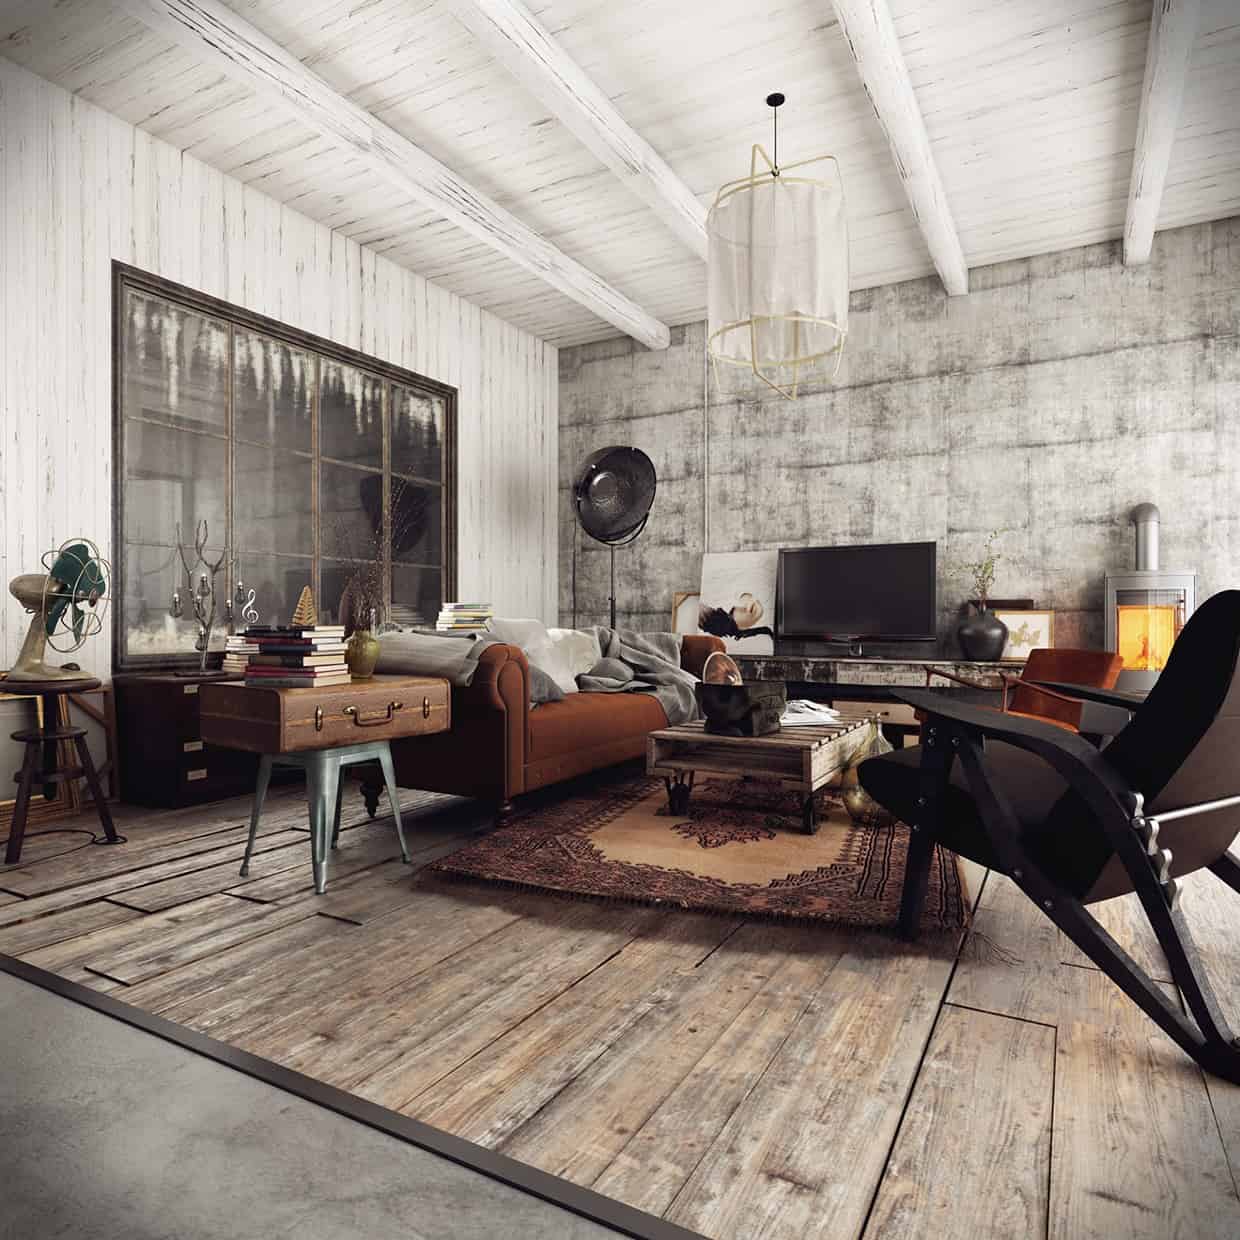 Vintage Industrial: Retro-Inspired Living Room Design Ideas with Modern Touches